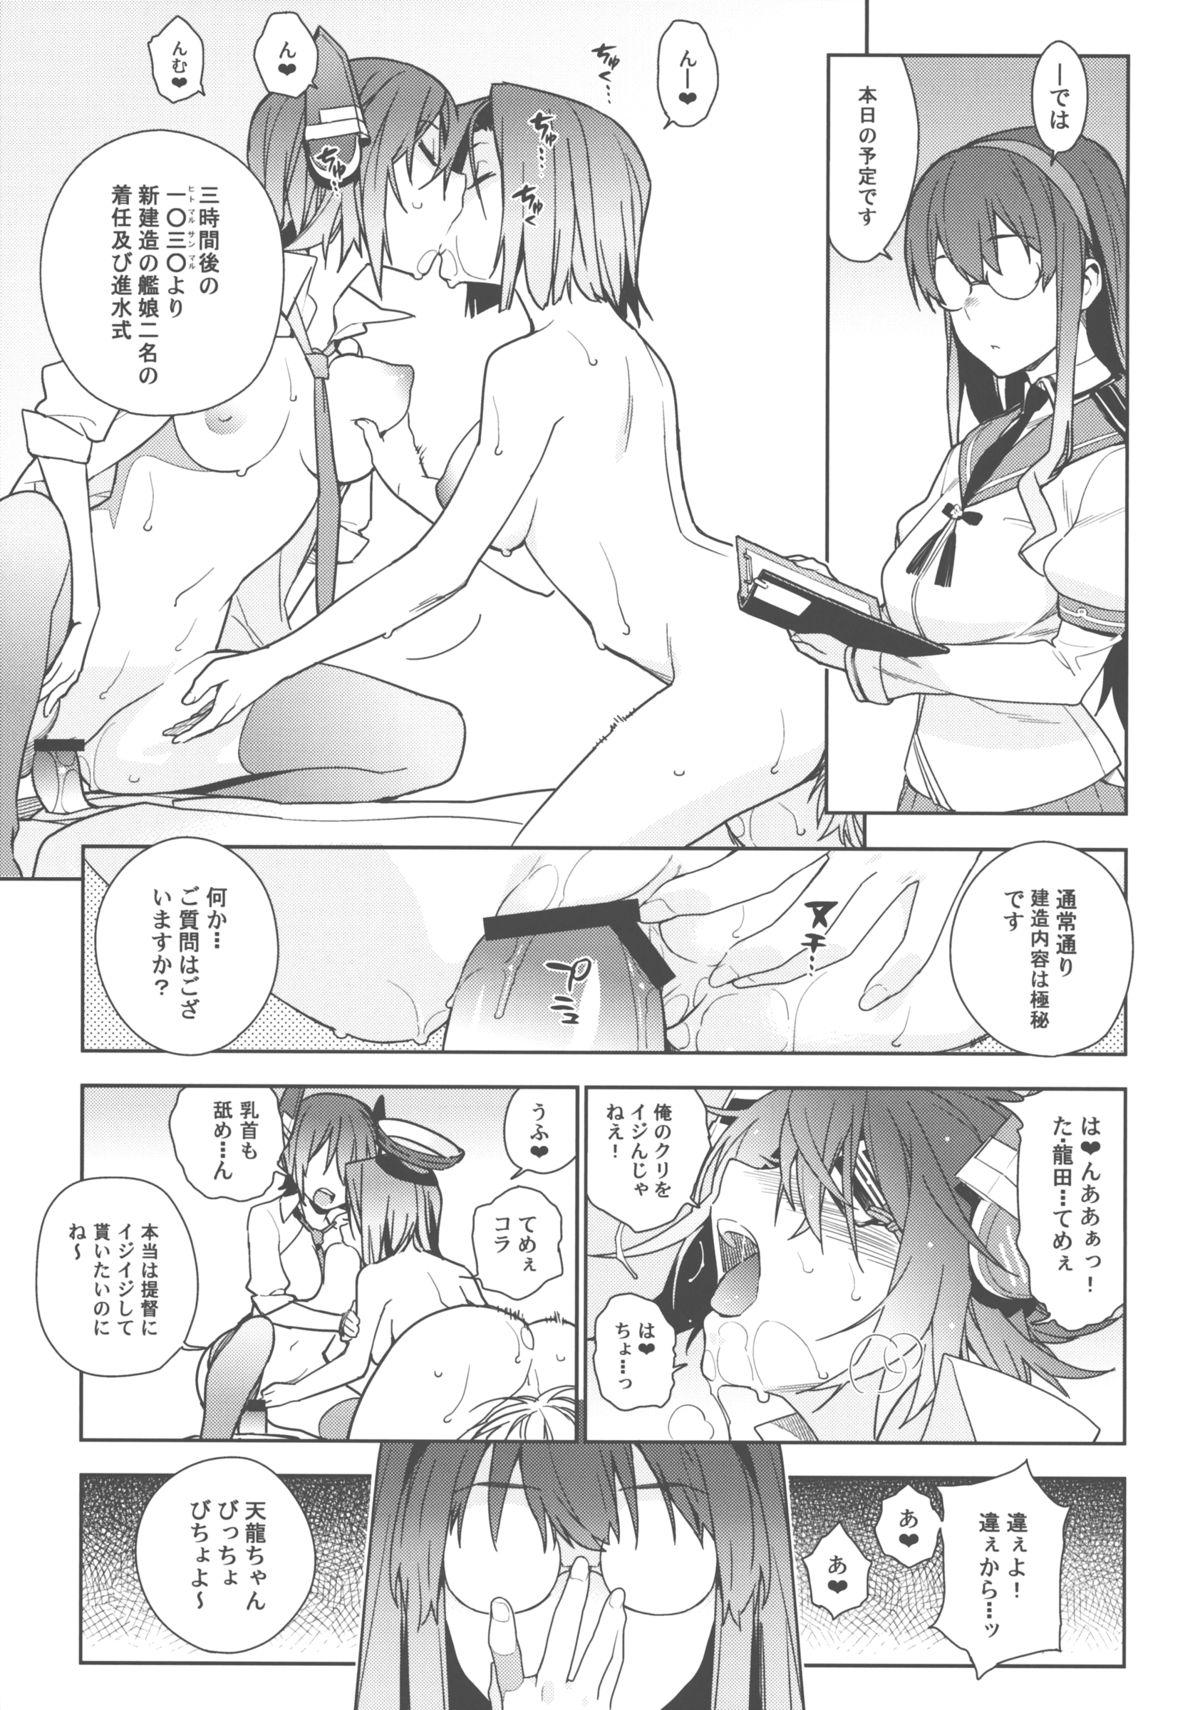 Teamskeet THE LAST ORDER - Kantai collection Married - Page 6